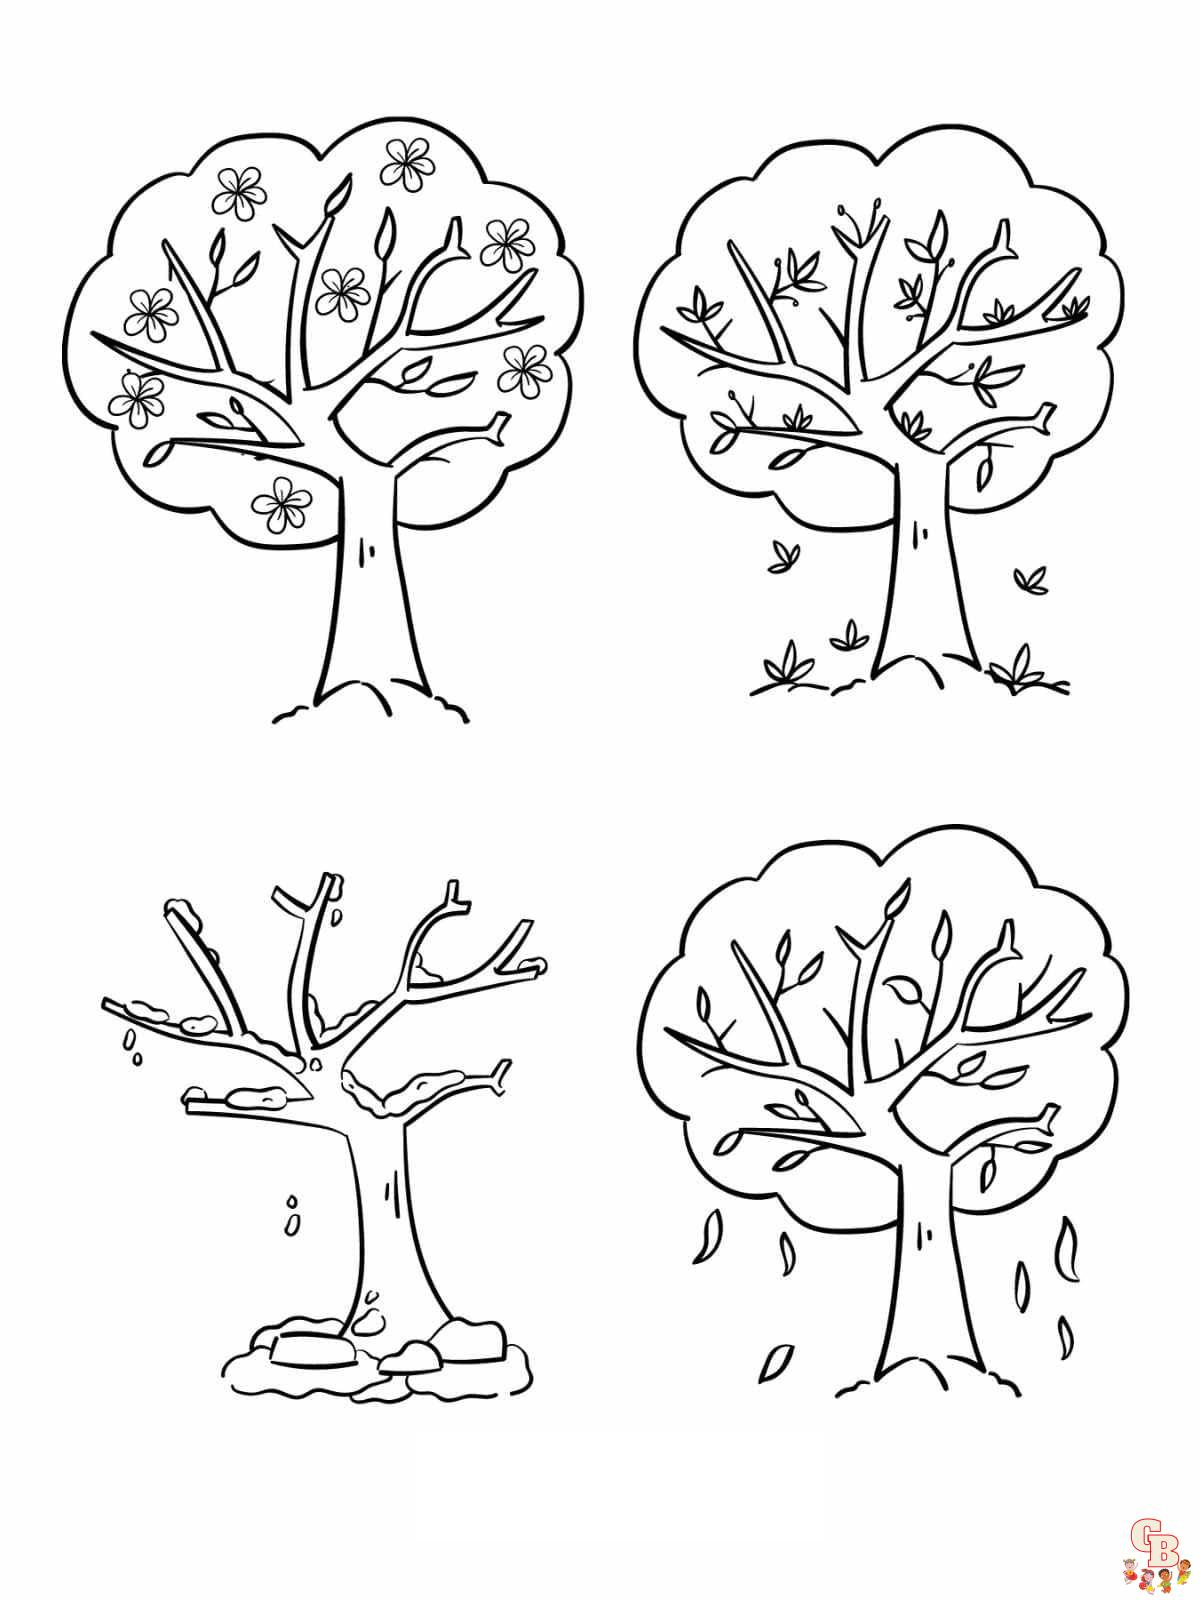 Seasons Coloring Pages 8